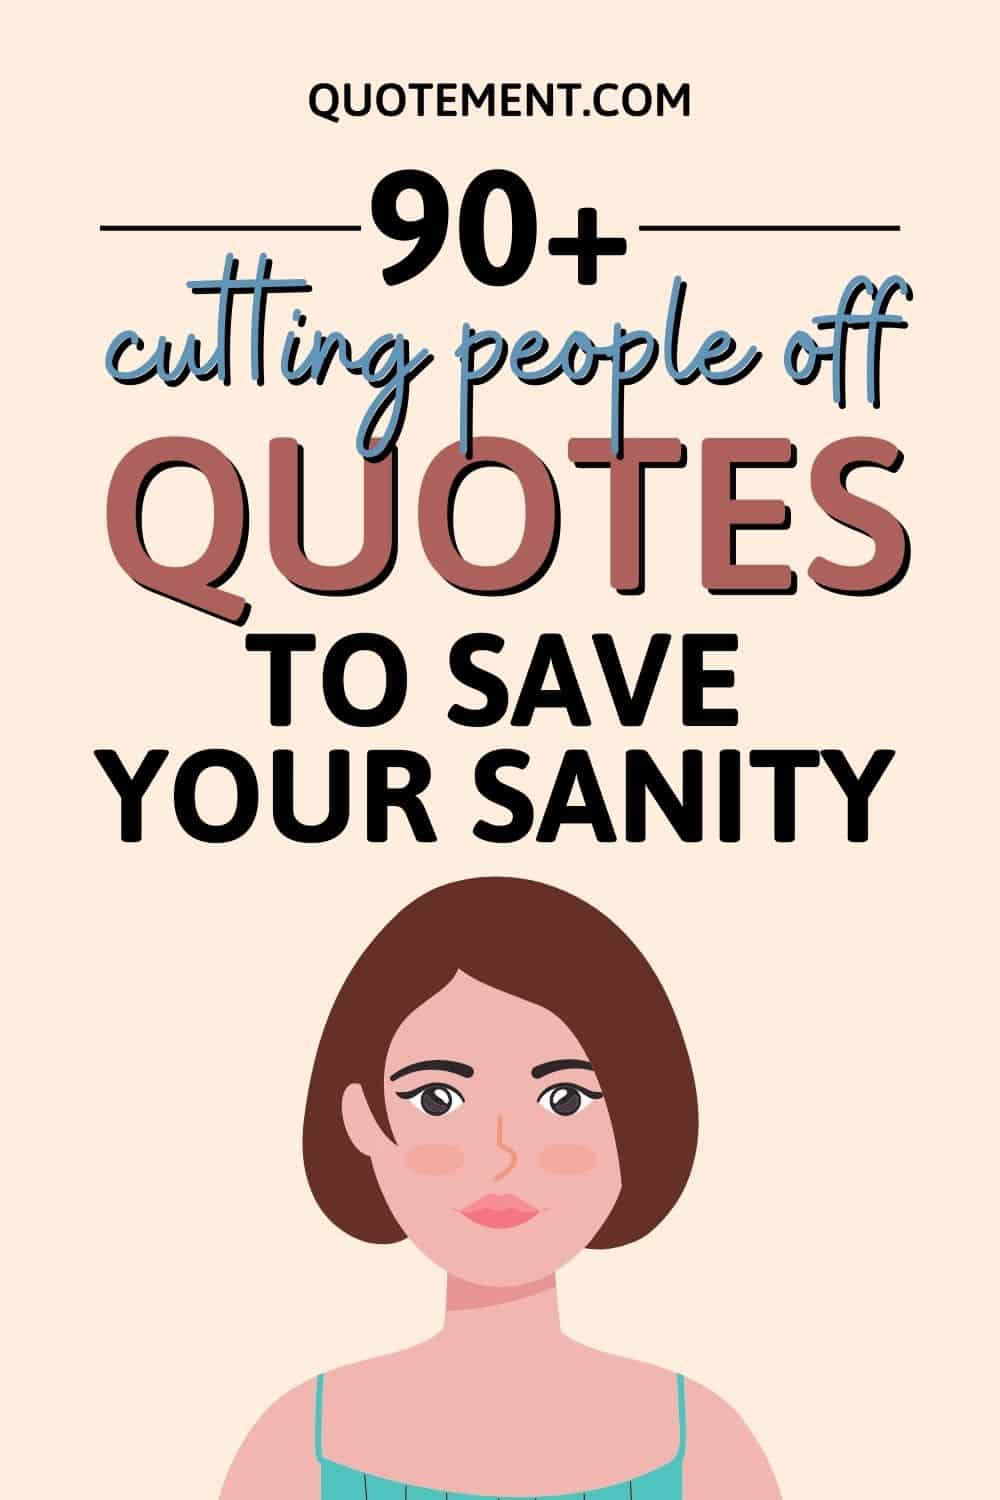 Top 90+ Cutting People Off Quotes To Save Your Sanity